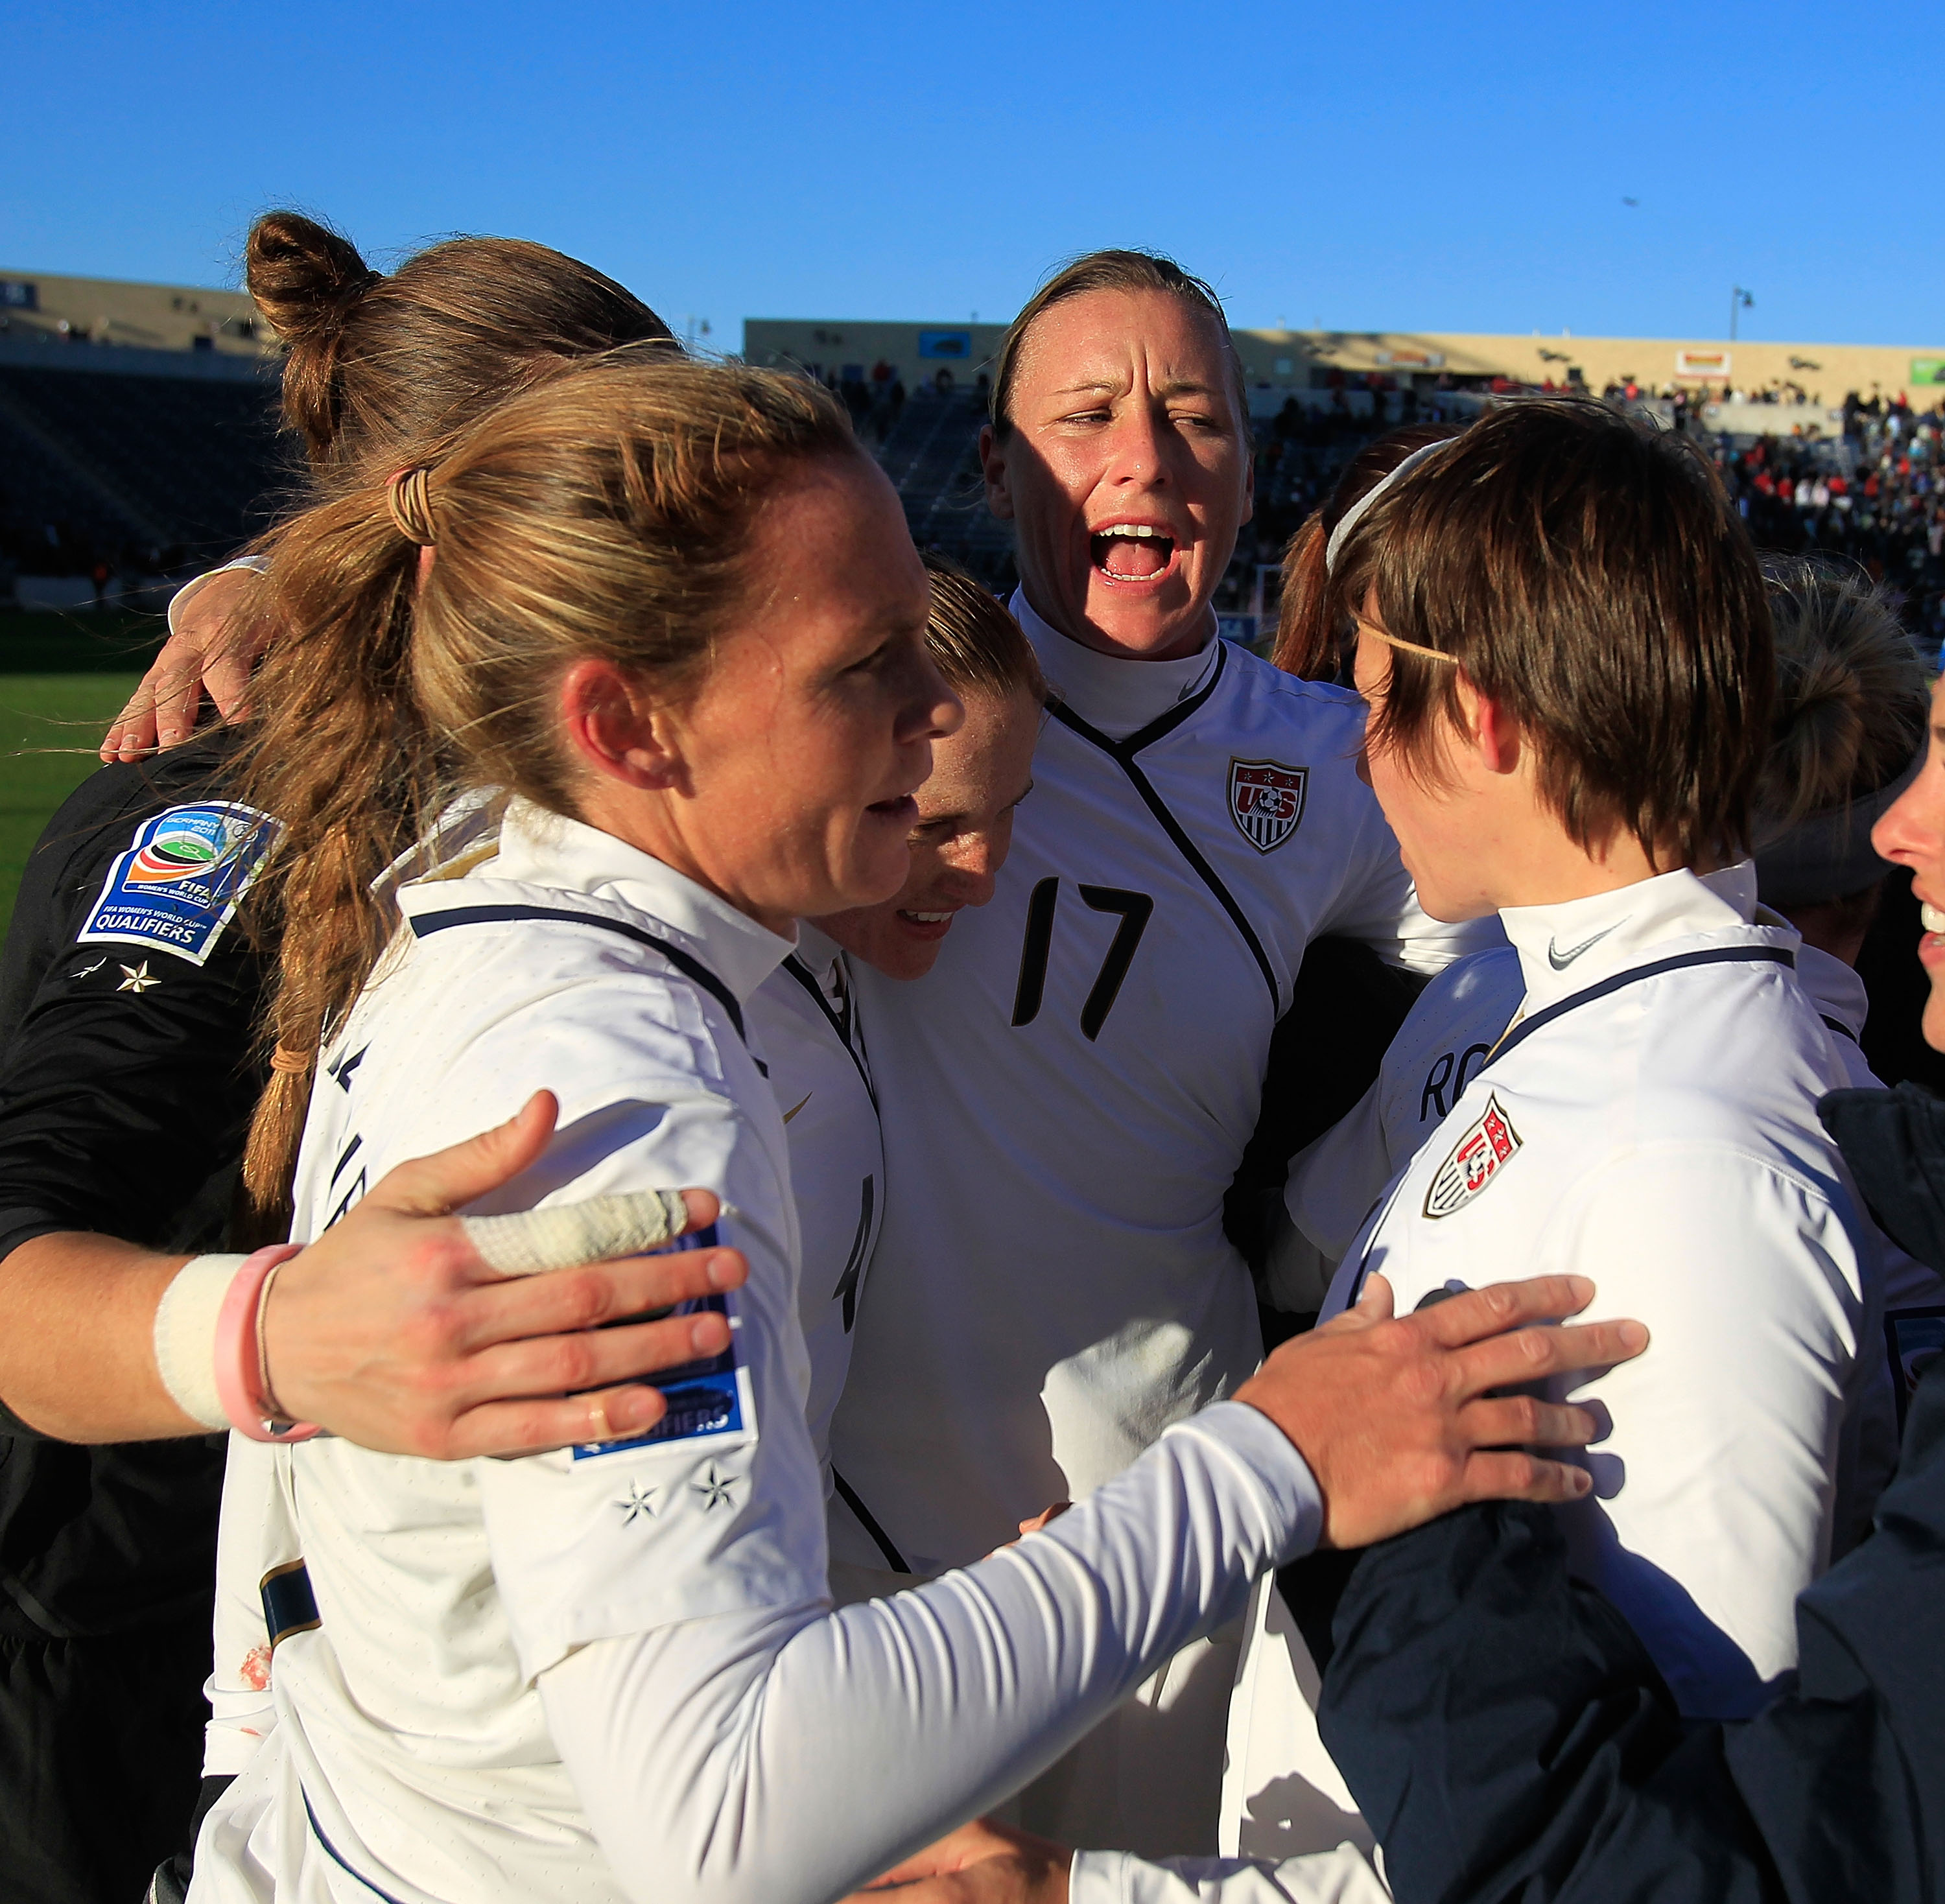 BRIDGEVIEW, IL - NOVEMBER 27: Members of the United States including (L-R) Christie Rampone #3, Nicole Barnhart #18, Rachel Buehler #4, Abby Wambach #17 and Amy LePeilbet #6 celebrate a win over Italy during a Women's World Cup Qualifying match at Toyota